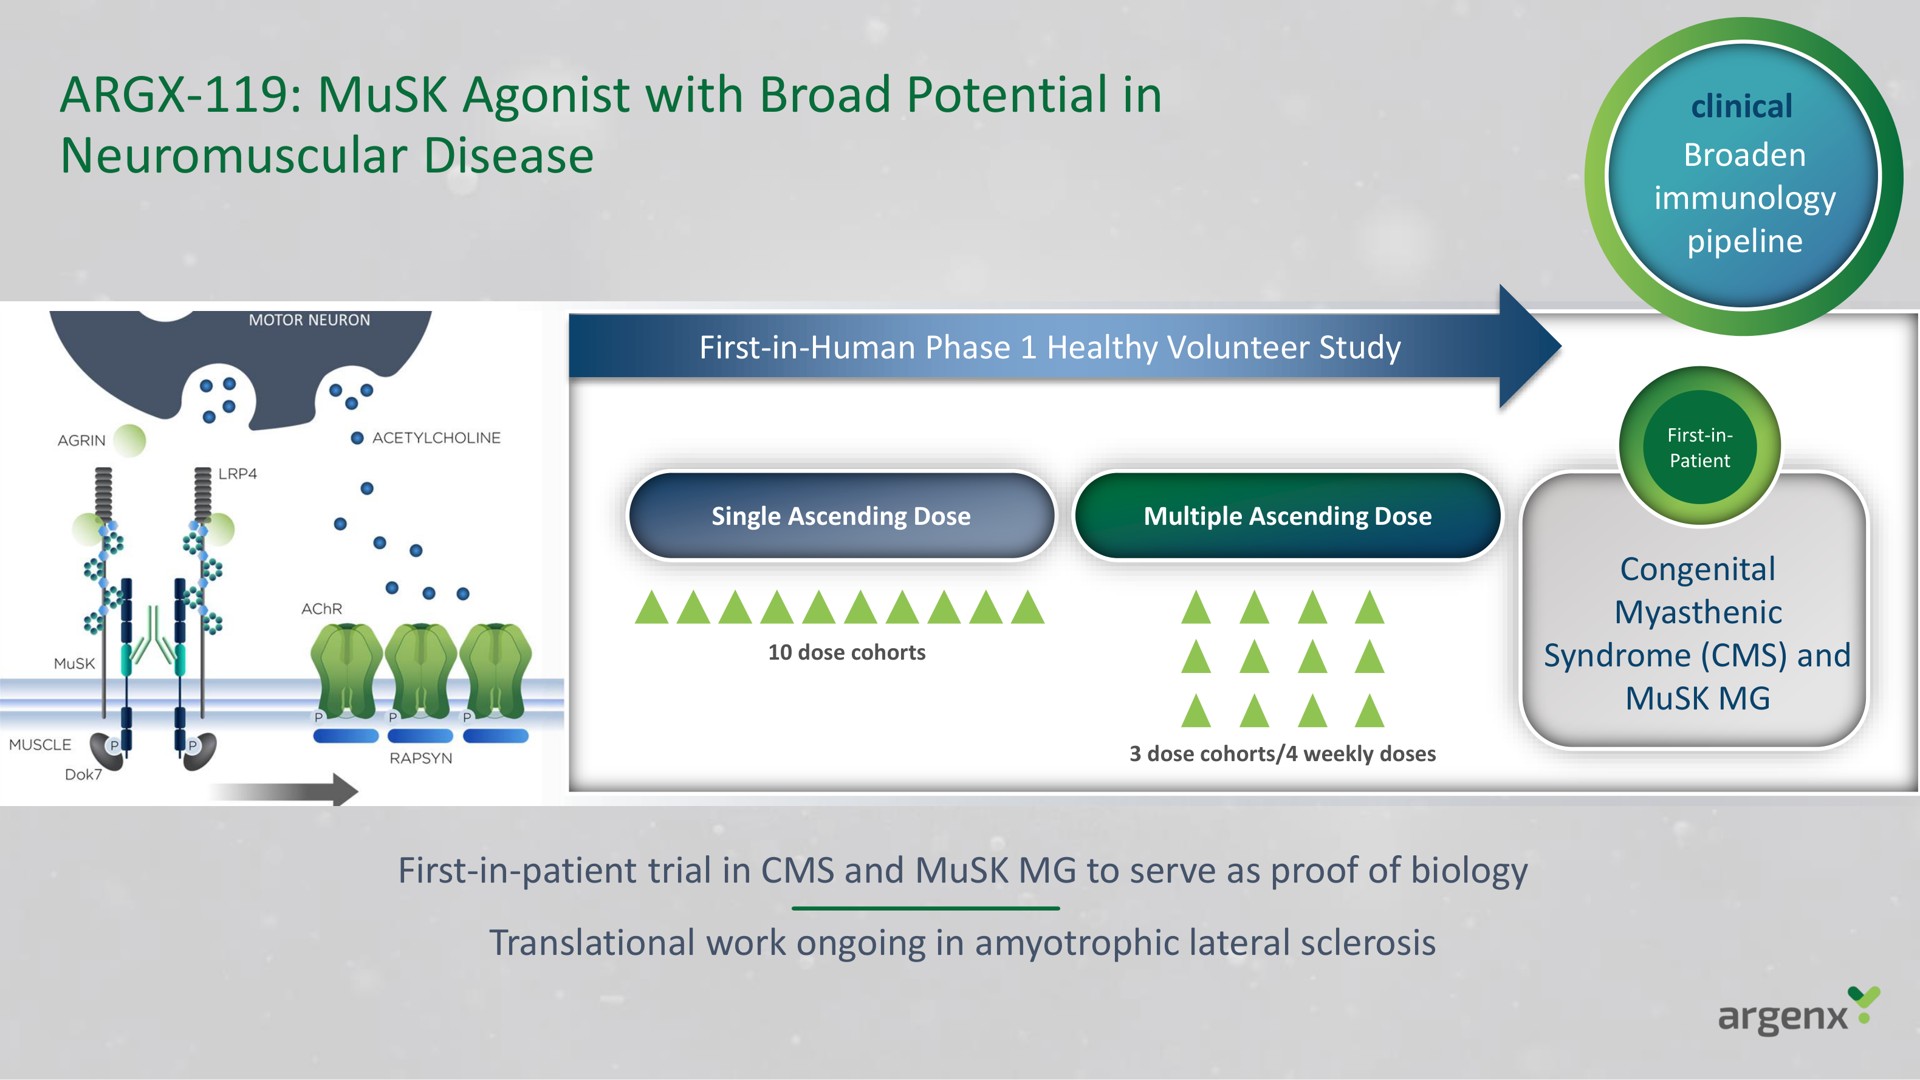 musk agonist with broad potential in neuromuscular disease | argenx SE